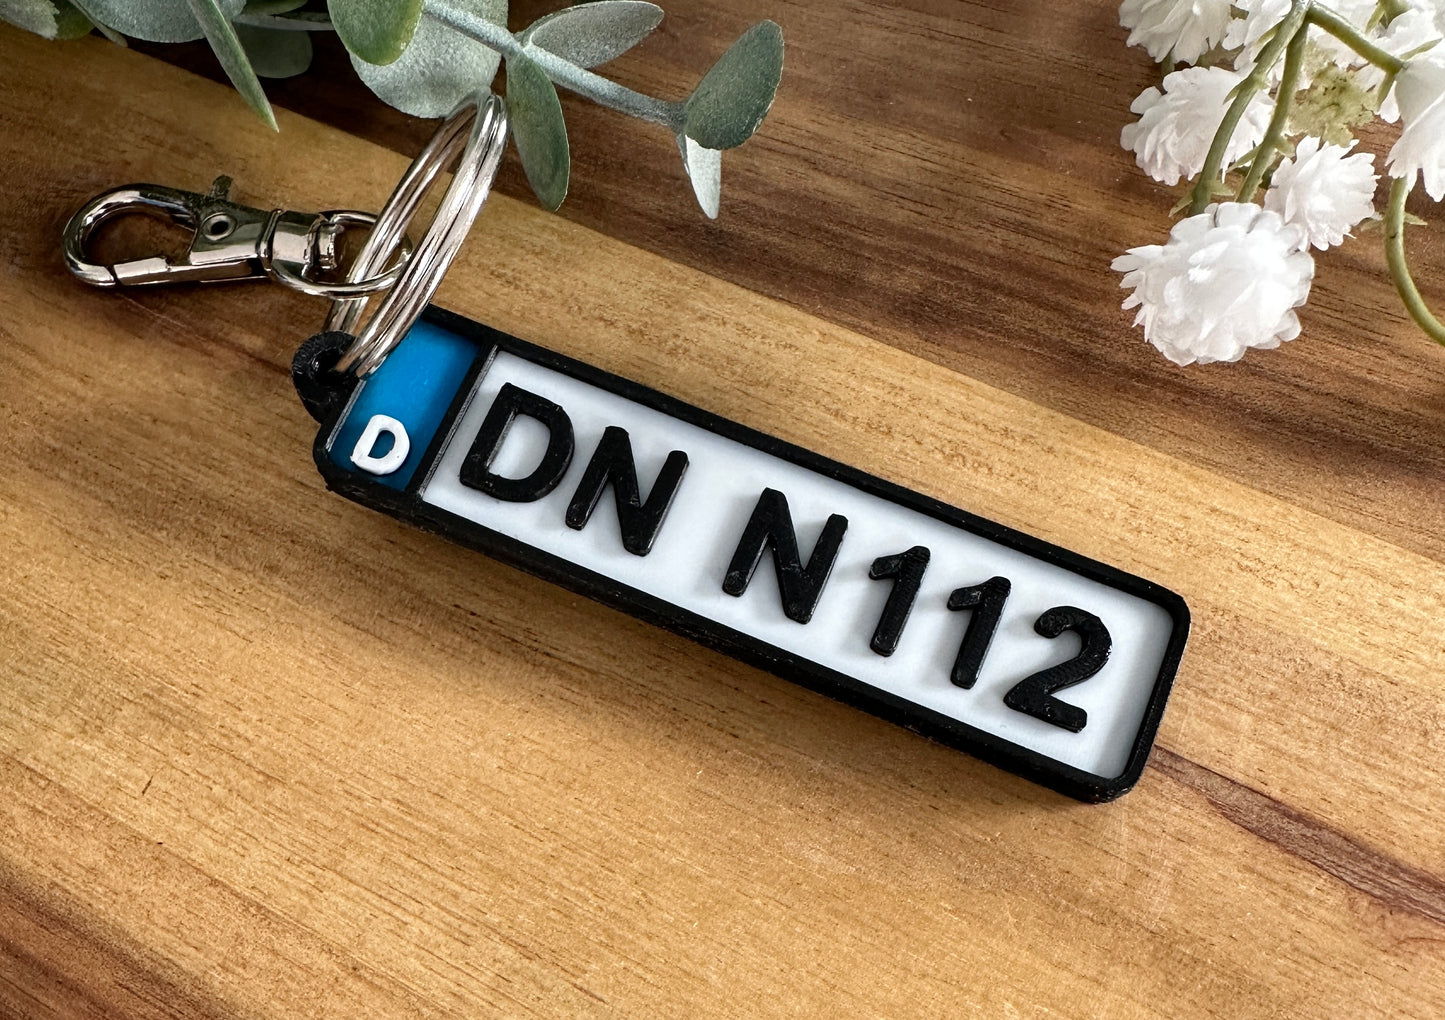 Keychain license plate 3D/personalized keychain/gift/car license plate/keychain with license plate